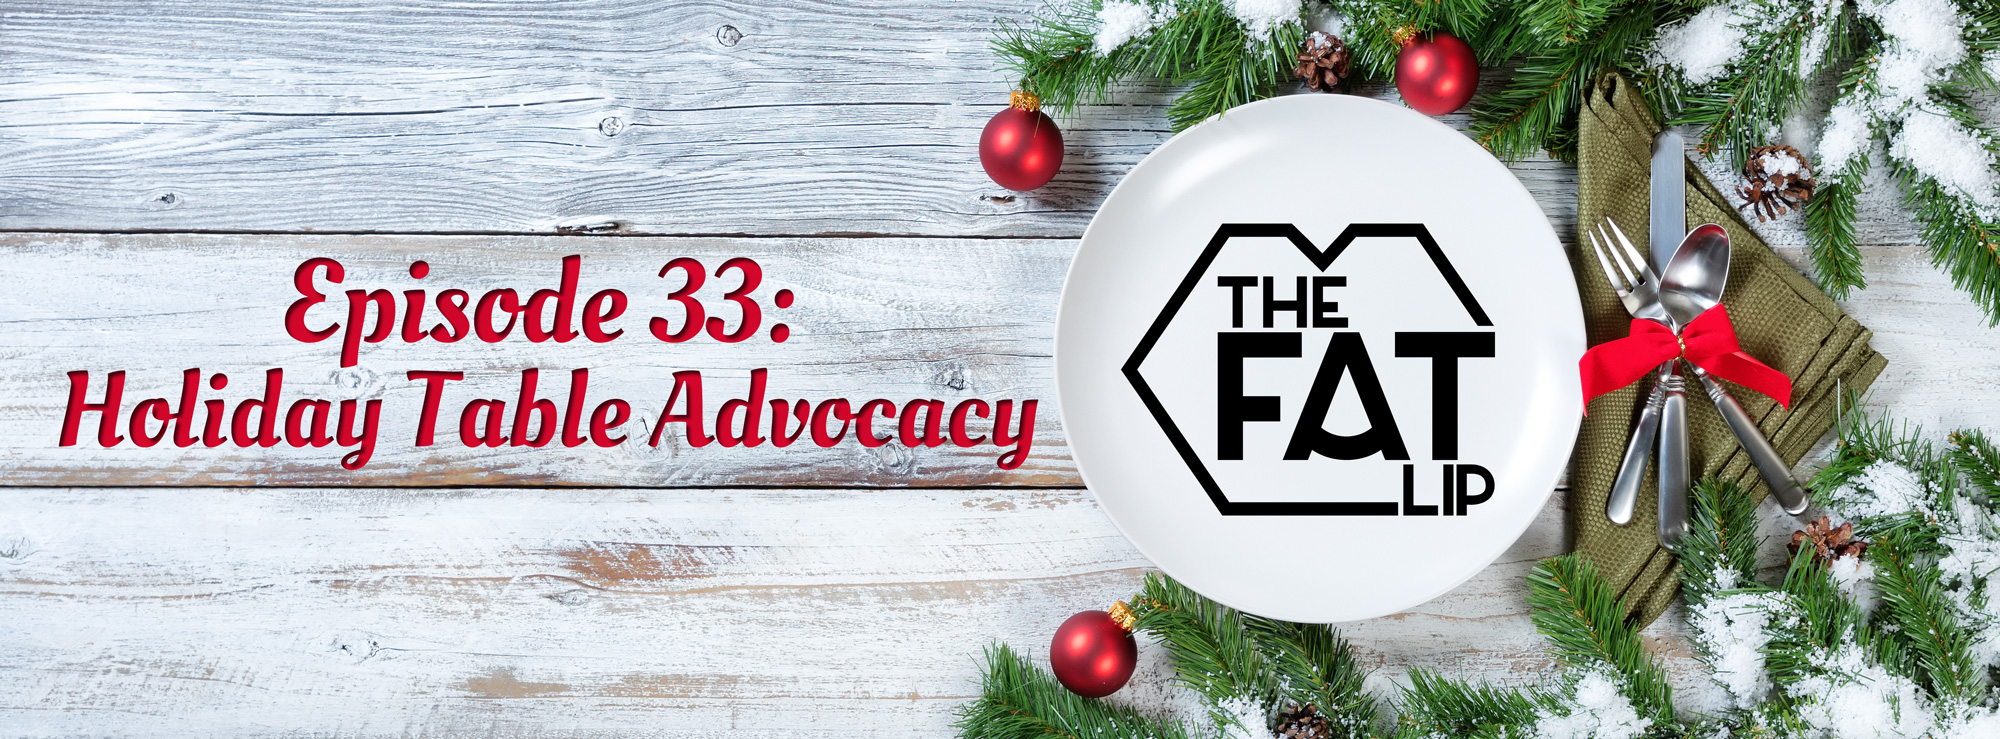 The Fat Lip Podcast Episode 33 Holiday Table Advocacy Header Image